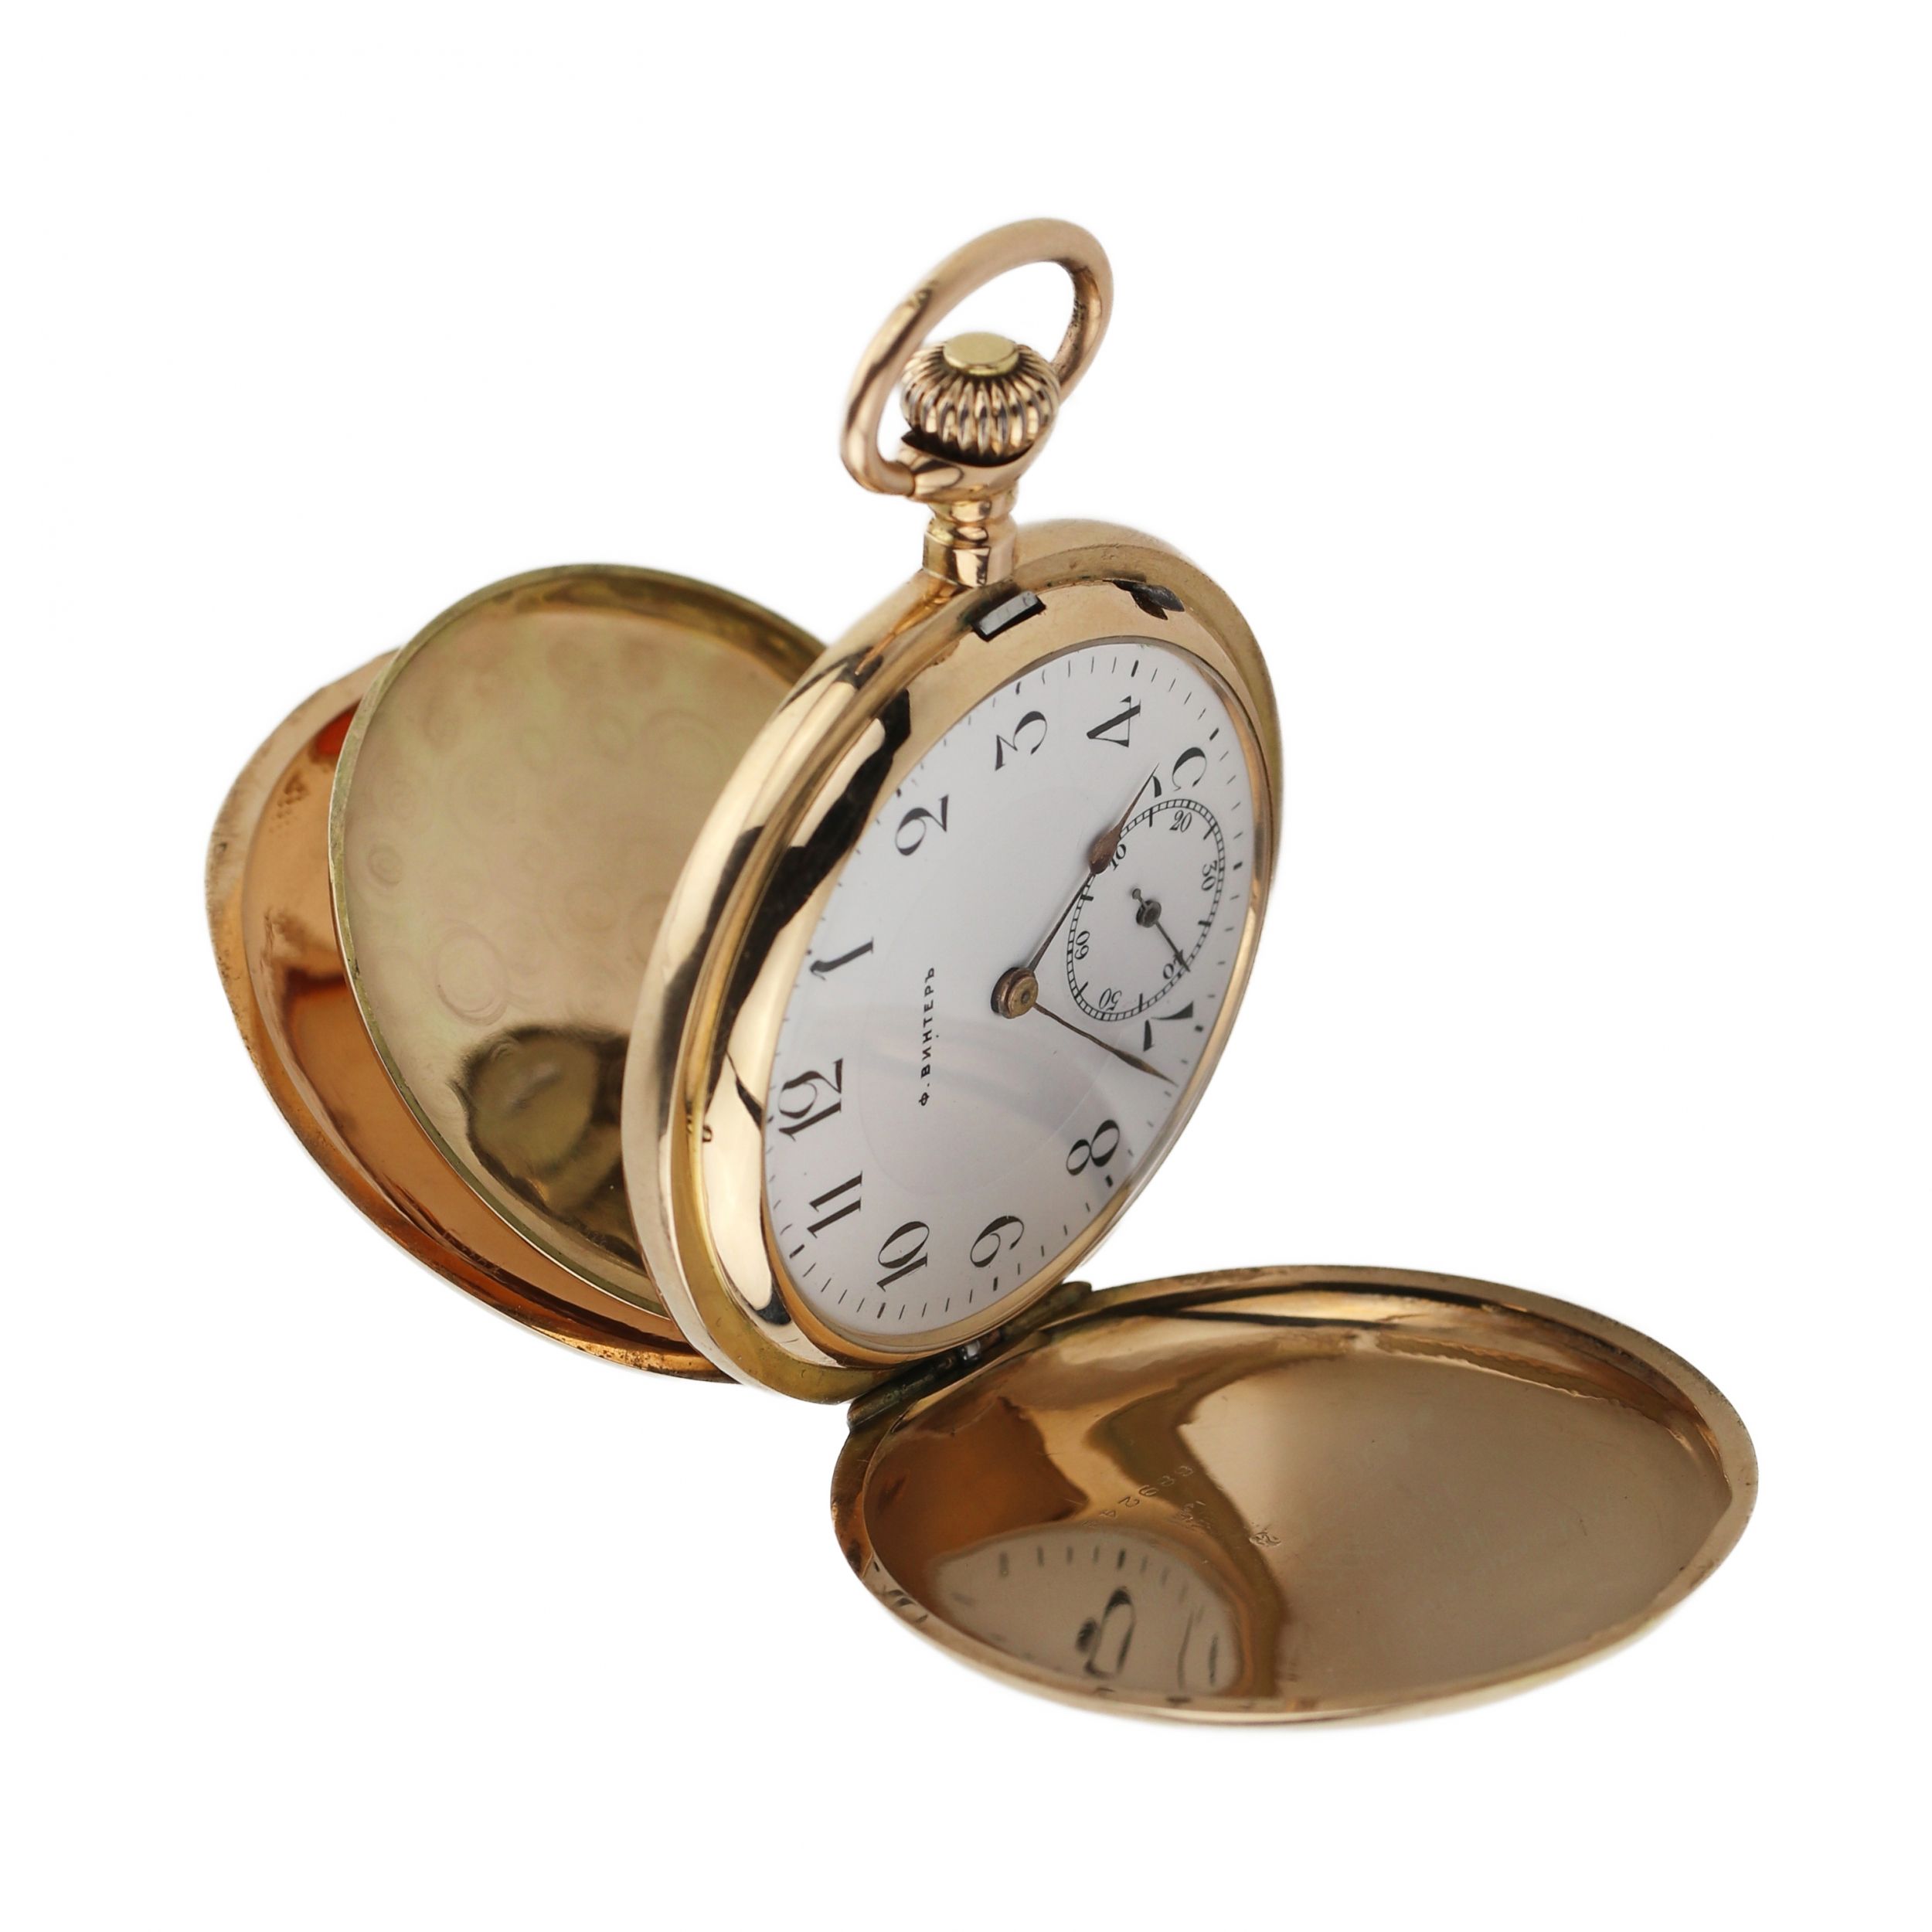 Russian, gold, pocket watch of the pre-revolutionary company F. Winter. - Image 5 of 10